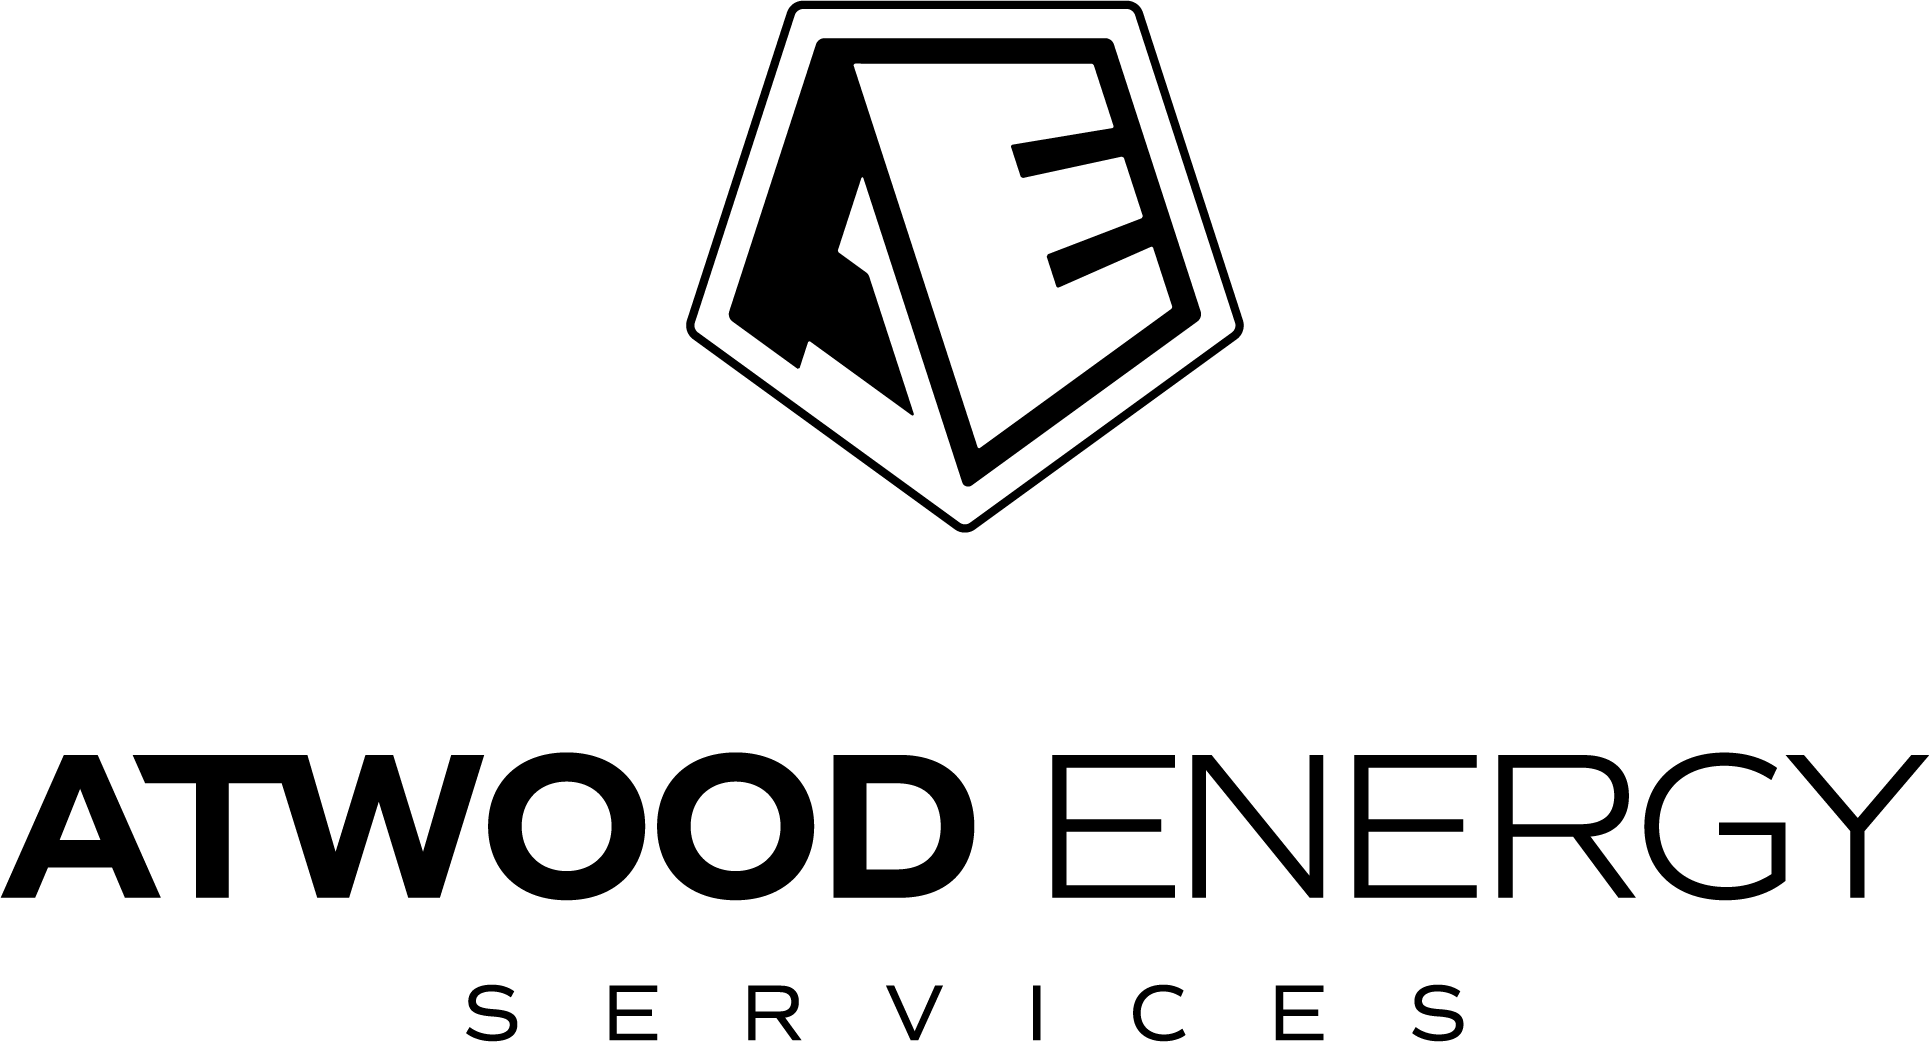 Atwood Energy Services logo